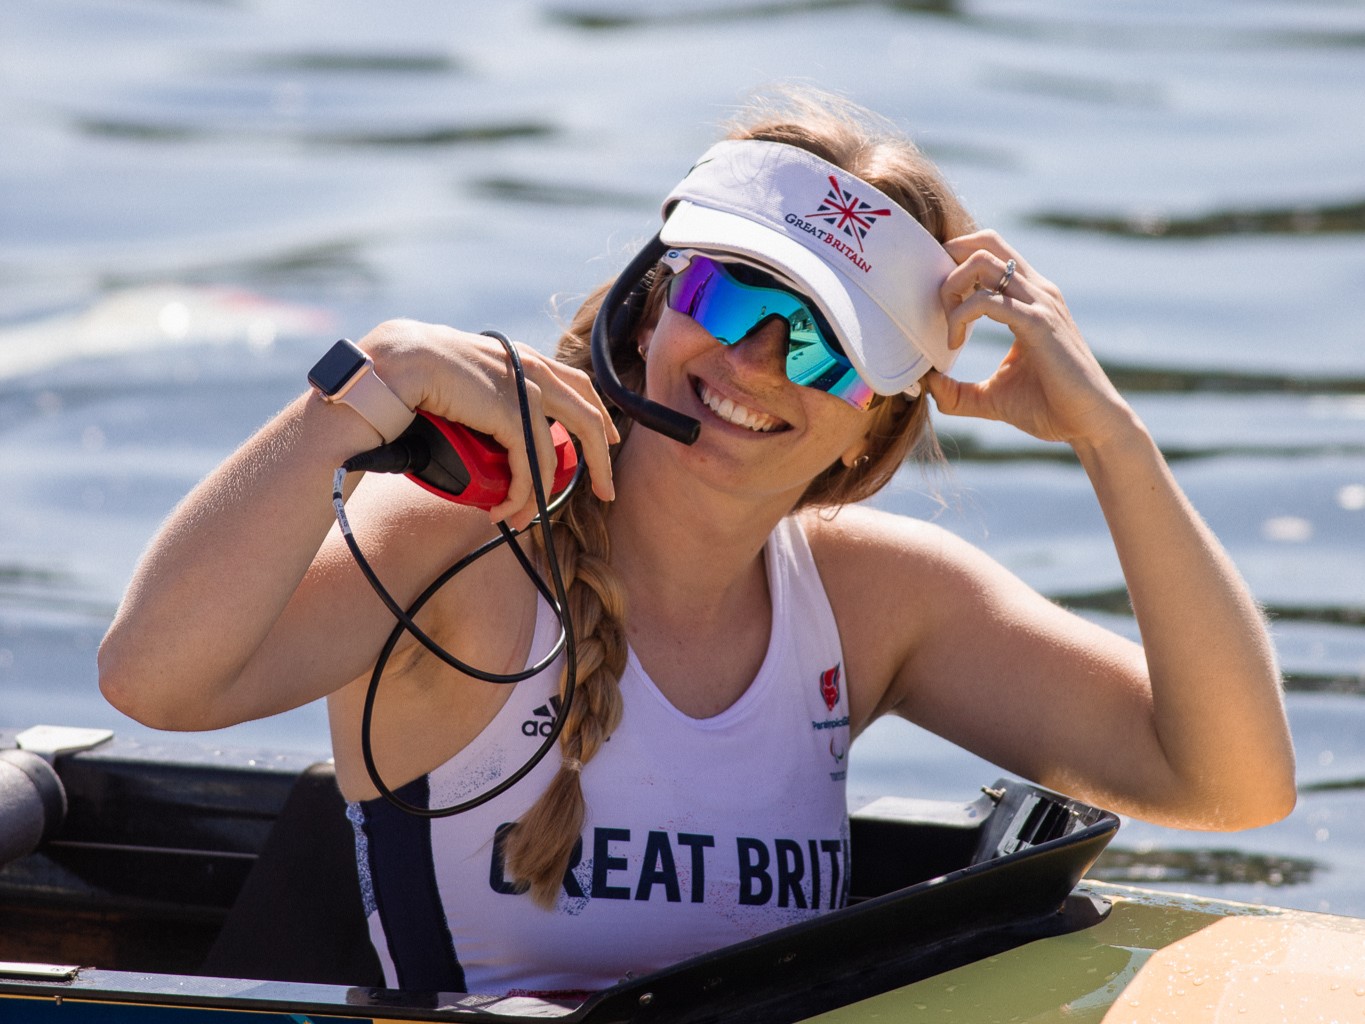 A smiling Erin in a boat wears a white Great Britain cap and white GB t shirt ands sunglasses